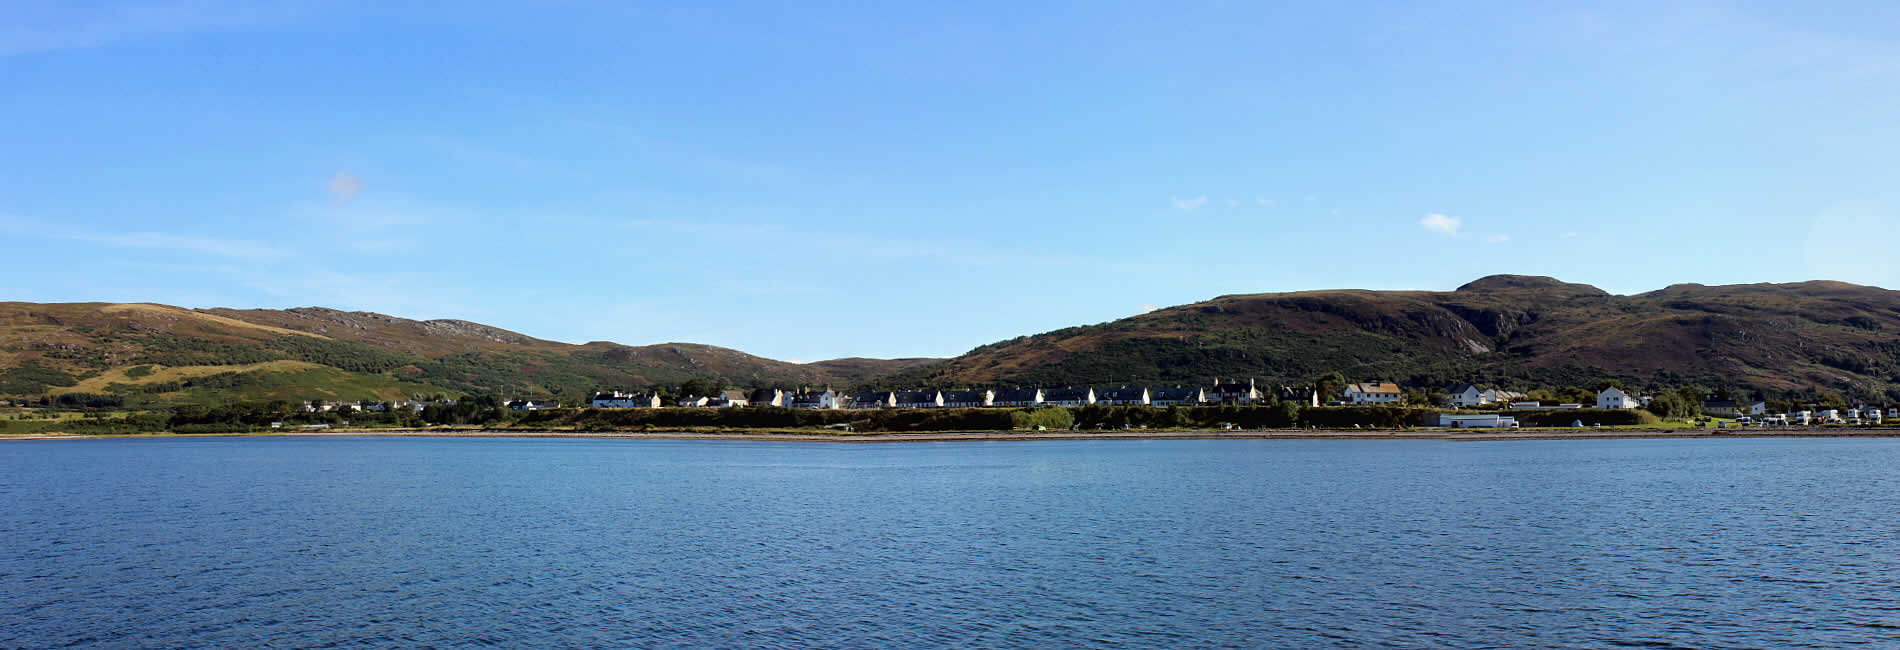 Ullapool from the sea